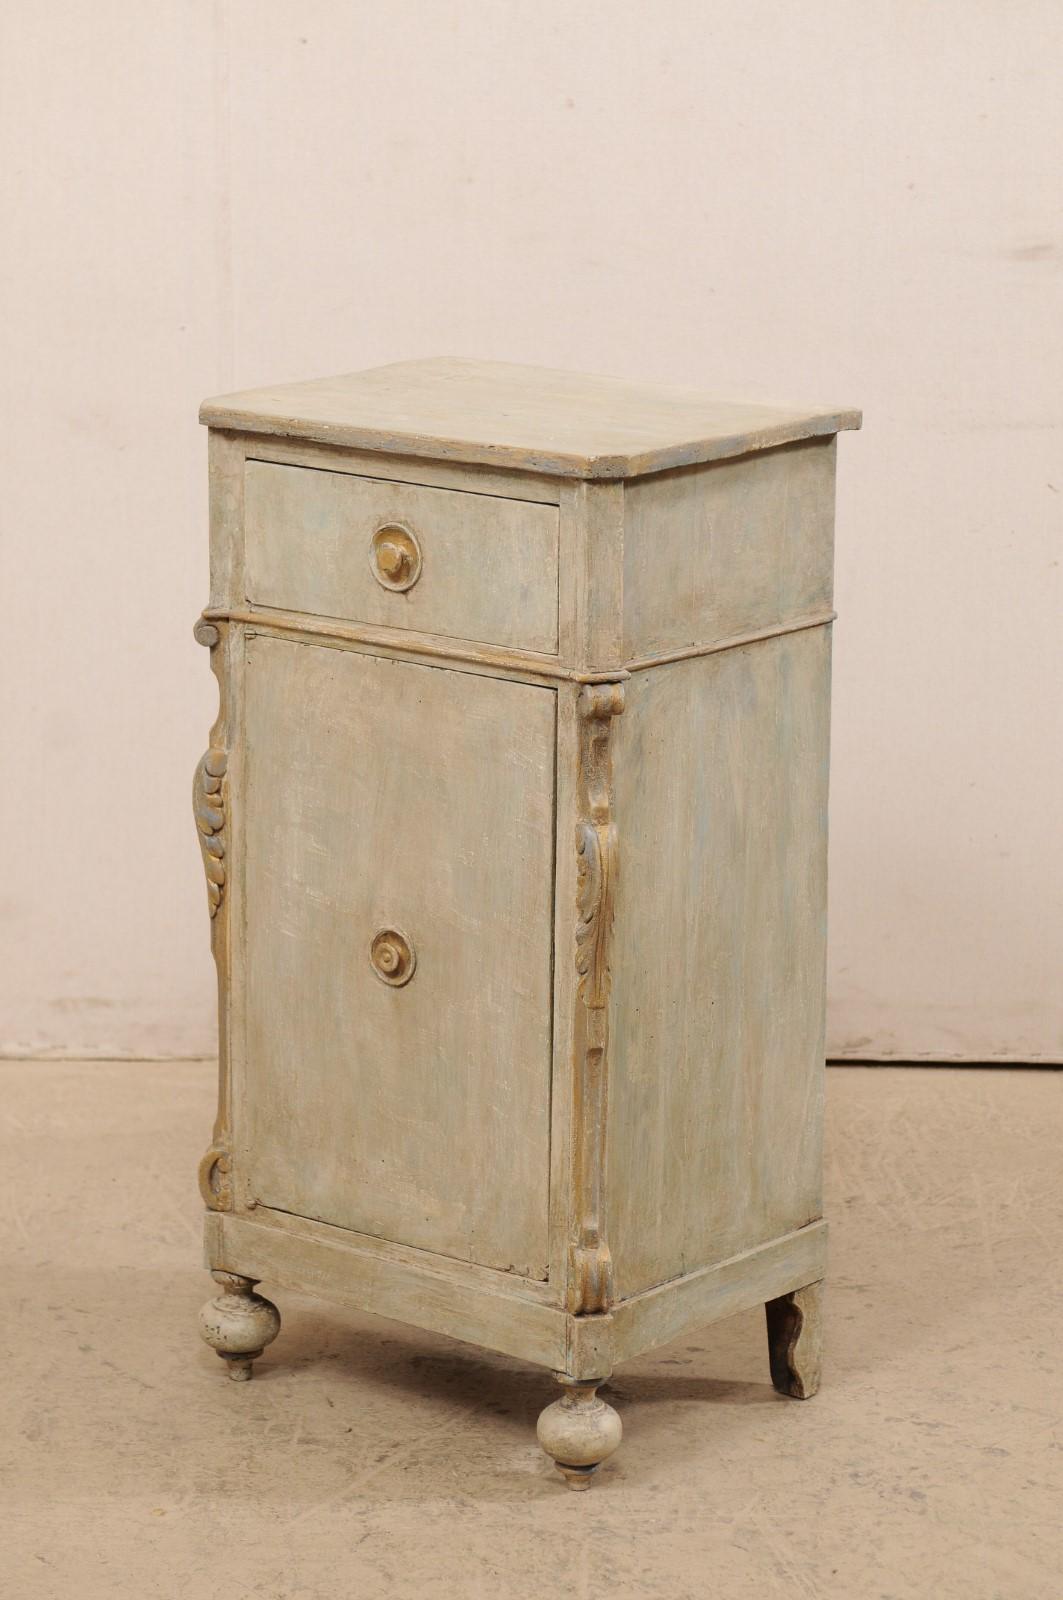 19th C. European Painted Wood Cabinet, Cute Petite Size!  Light Blue/Grey w/Gold 4